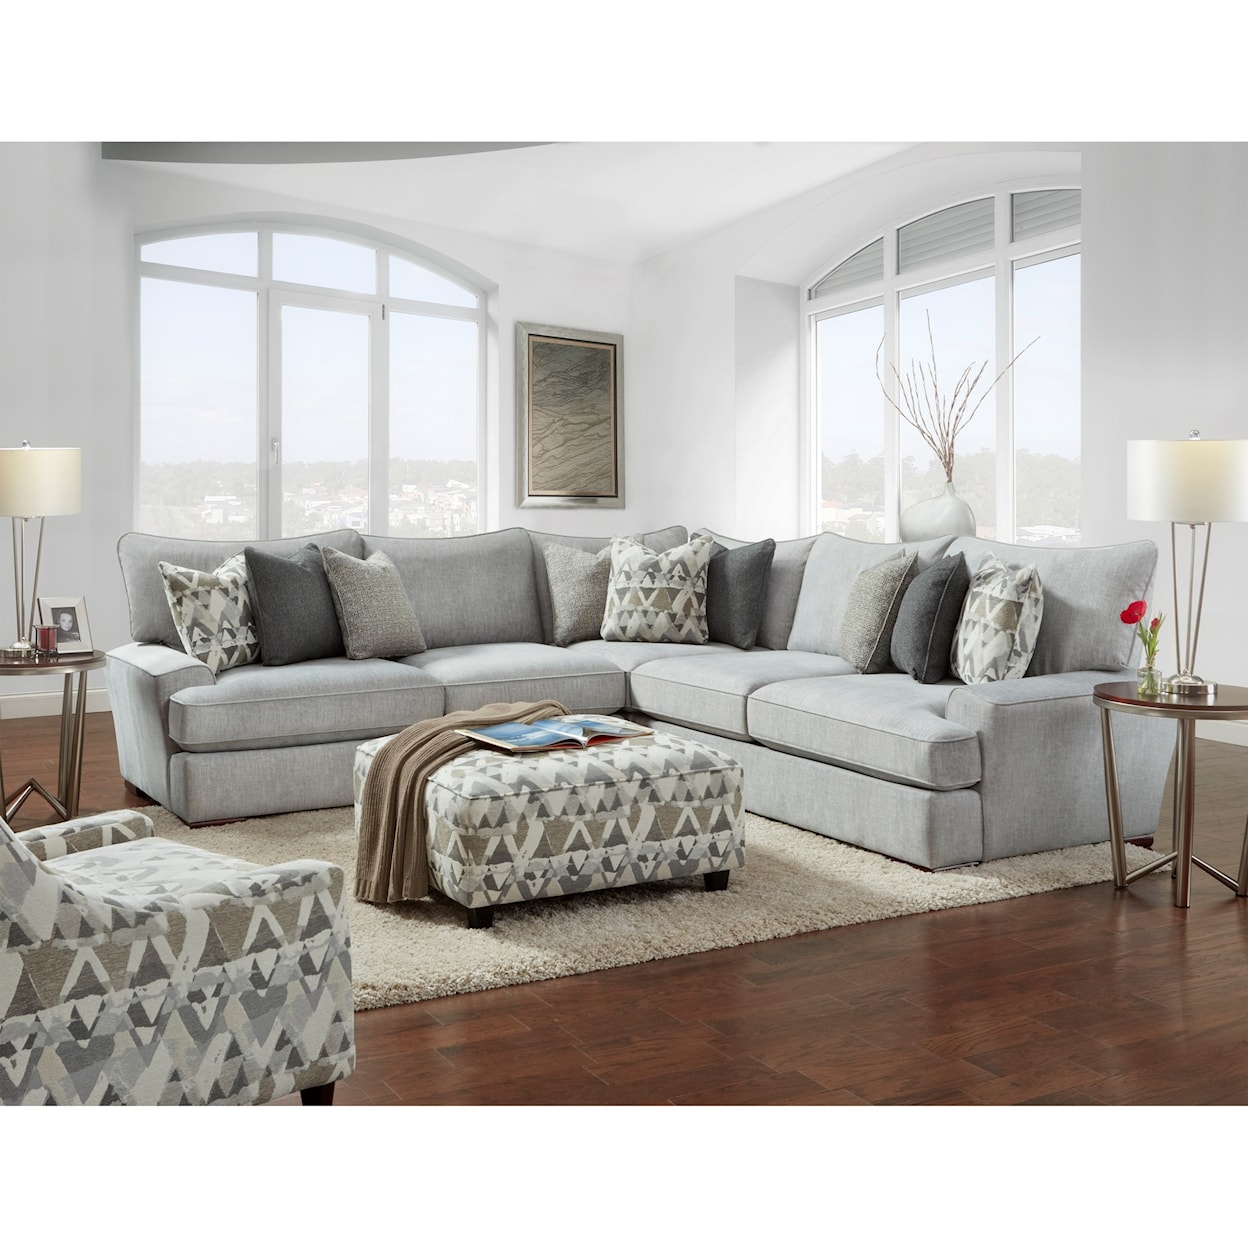 Fusion Furniture 2000 ALTON SILVER Stationary Living Room Group